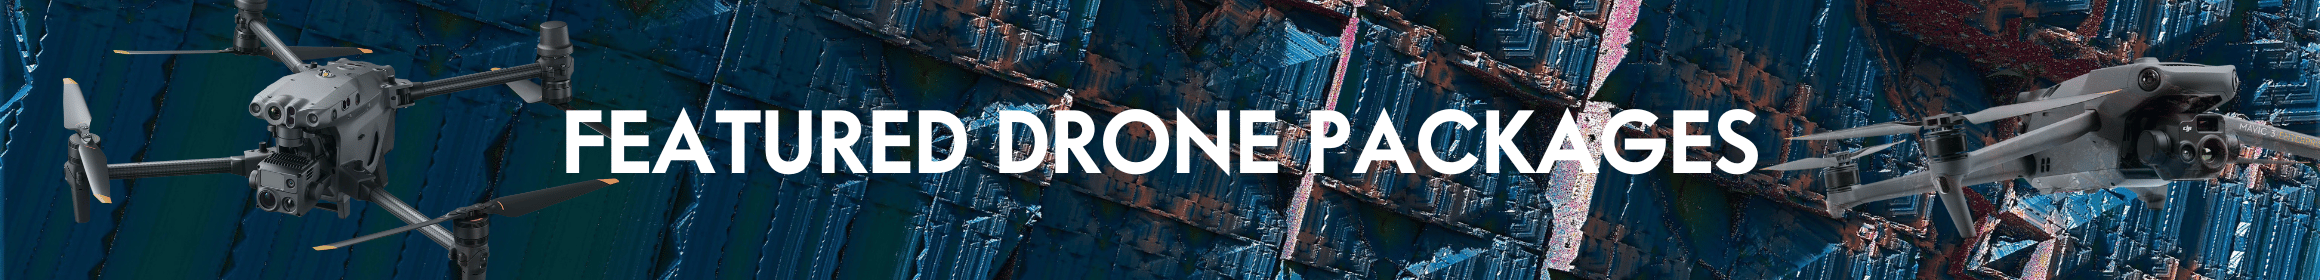 Dronefly Featured Drone Packages